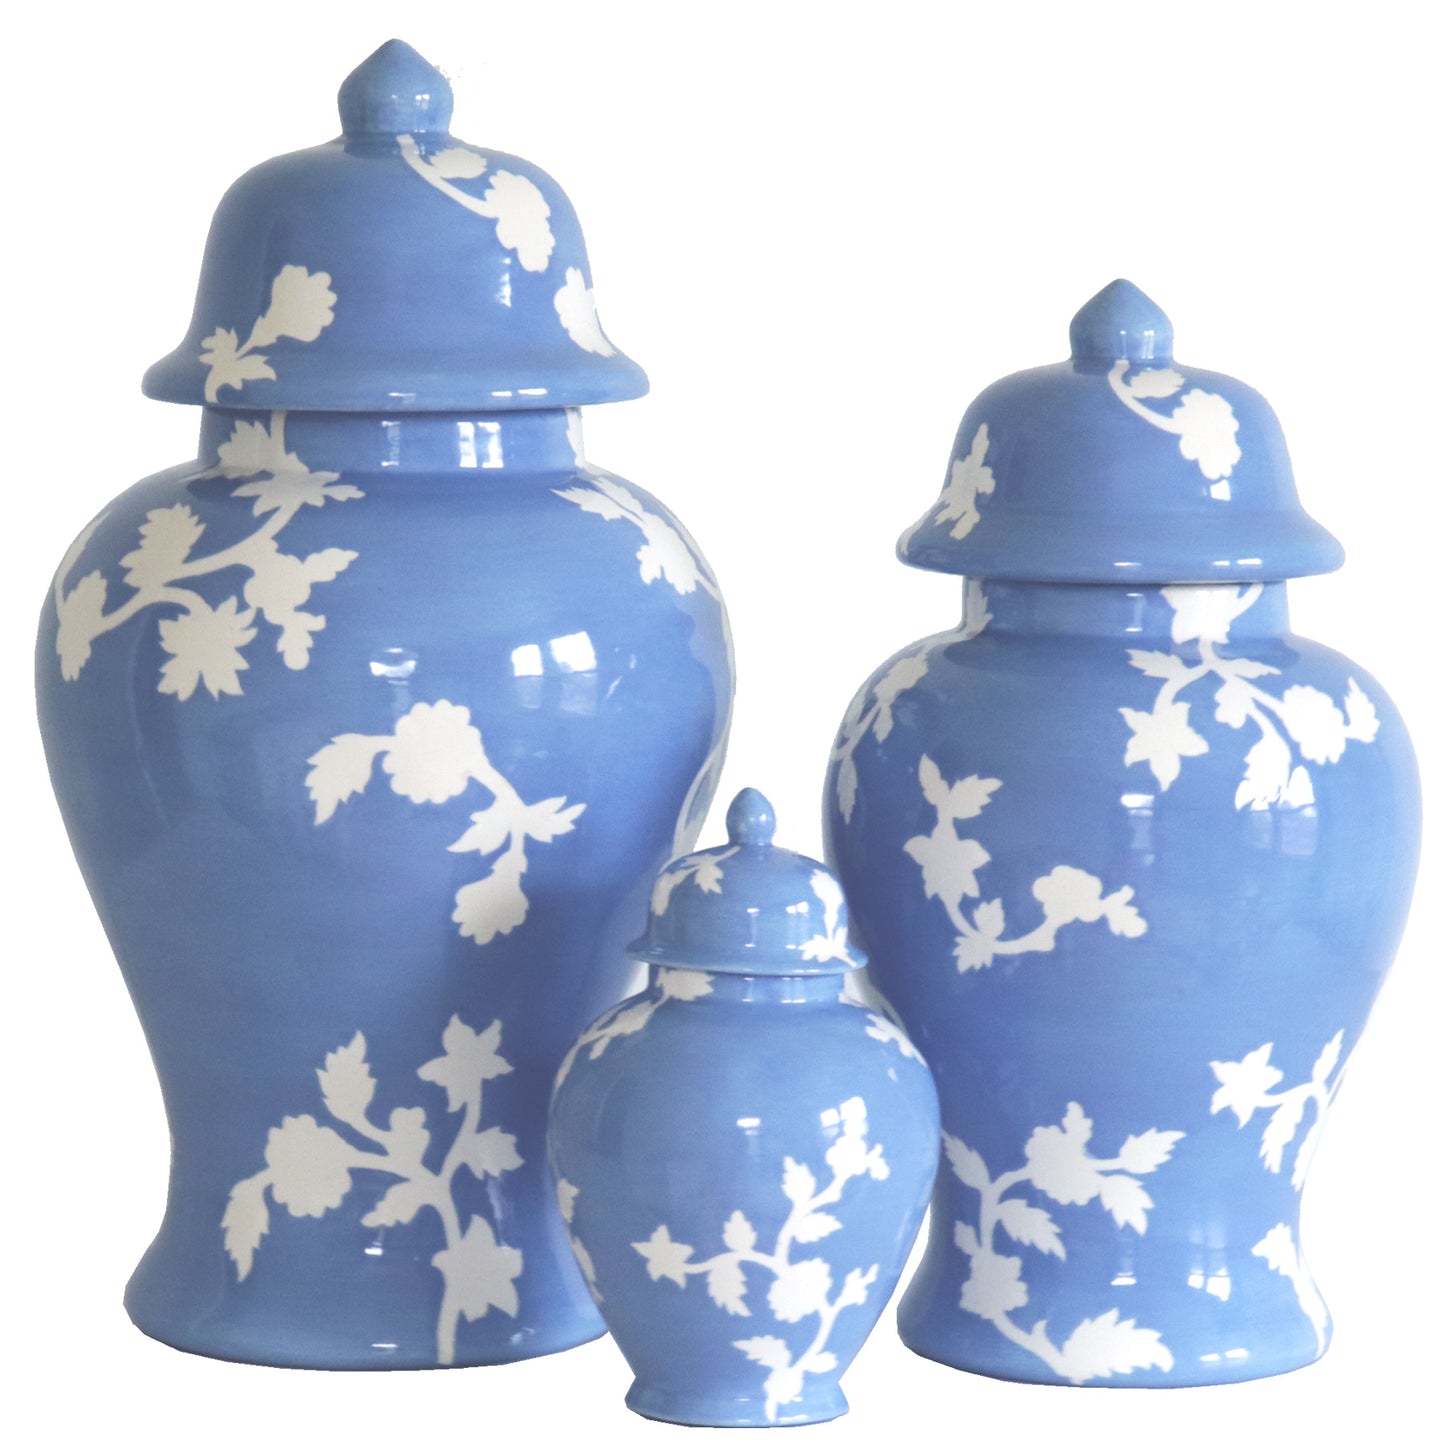 Chinoiserie Dreams Ginger Jars in French Blue